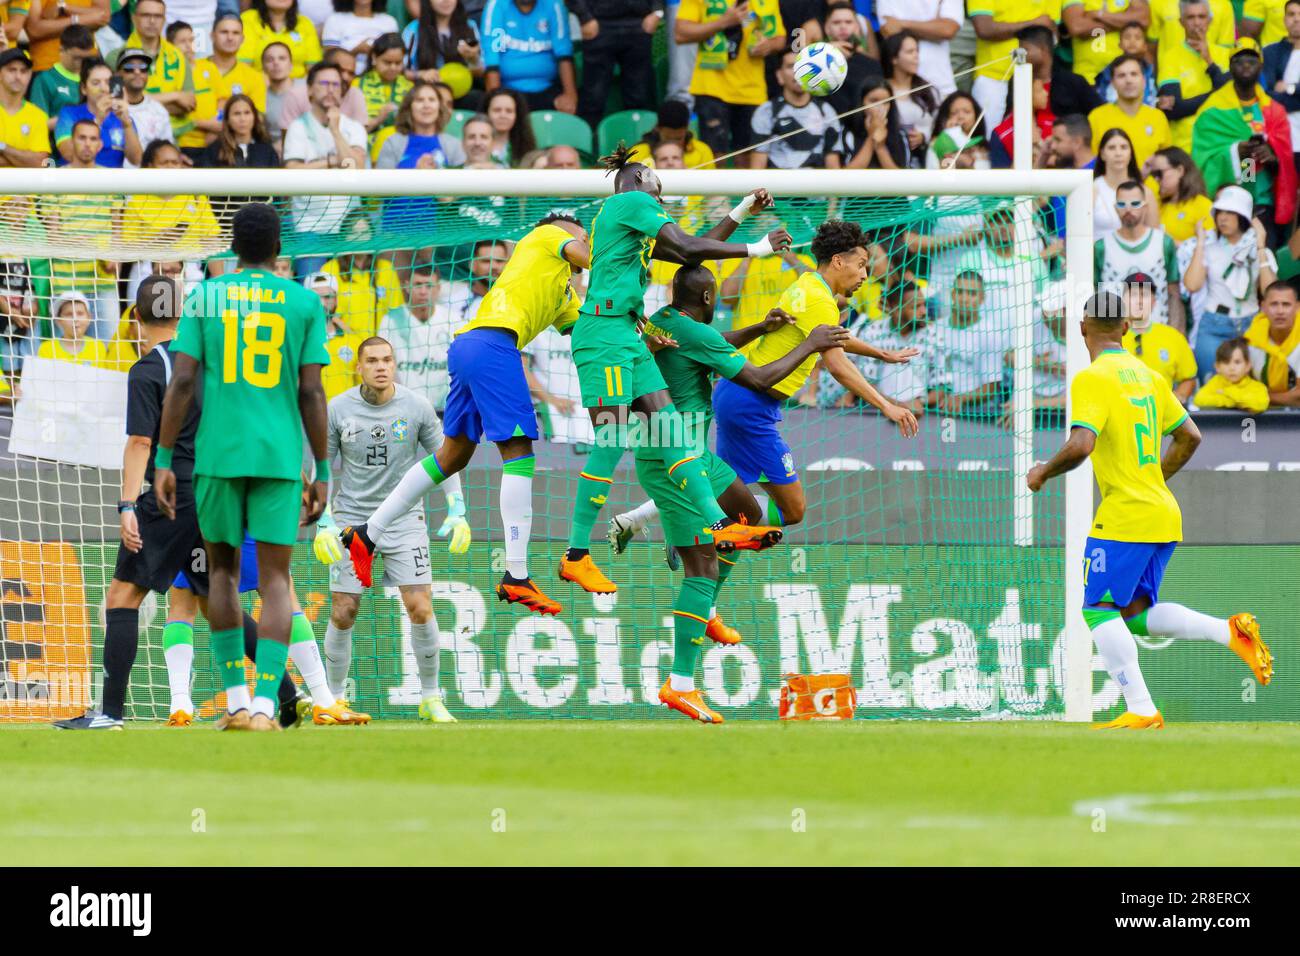 Lisbon, Portugal  June 20, 2023, Kalidou Koulibaly, Pathe Ciss of Senegal in duel with Eder Militao, Marquinhos of Brazil during the International Friendly Football match between Brazil and Senegal on June 20, 2023 at Jose Alvalade stadium in Lisbon, Portugal Stock Photo